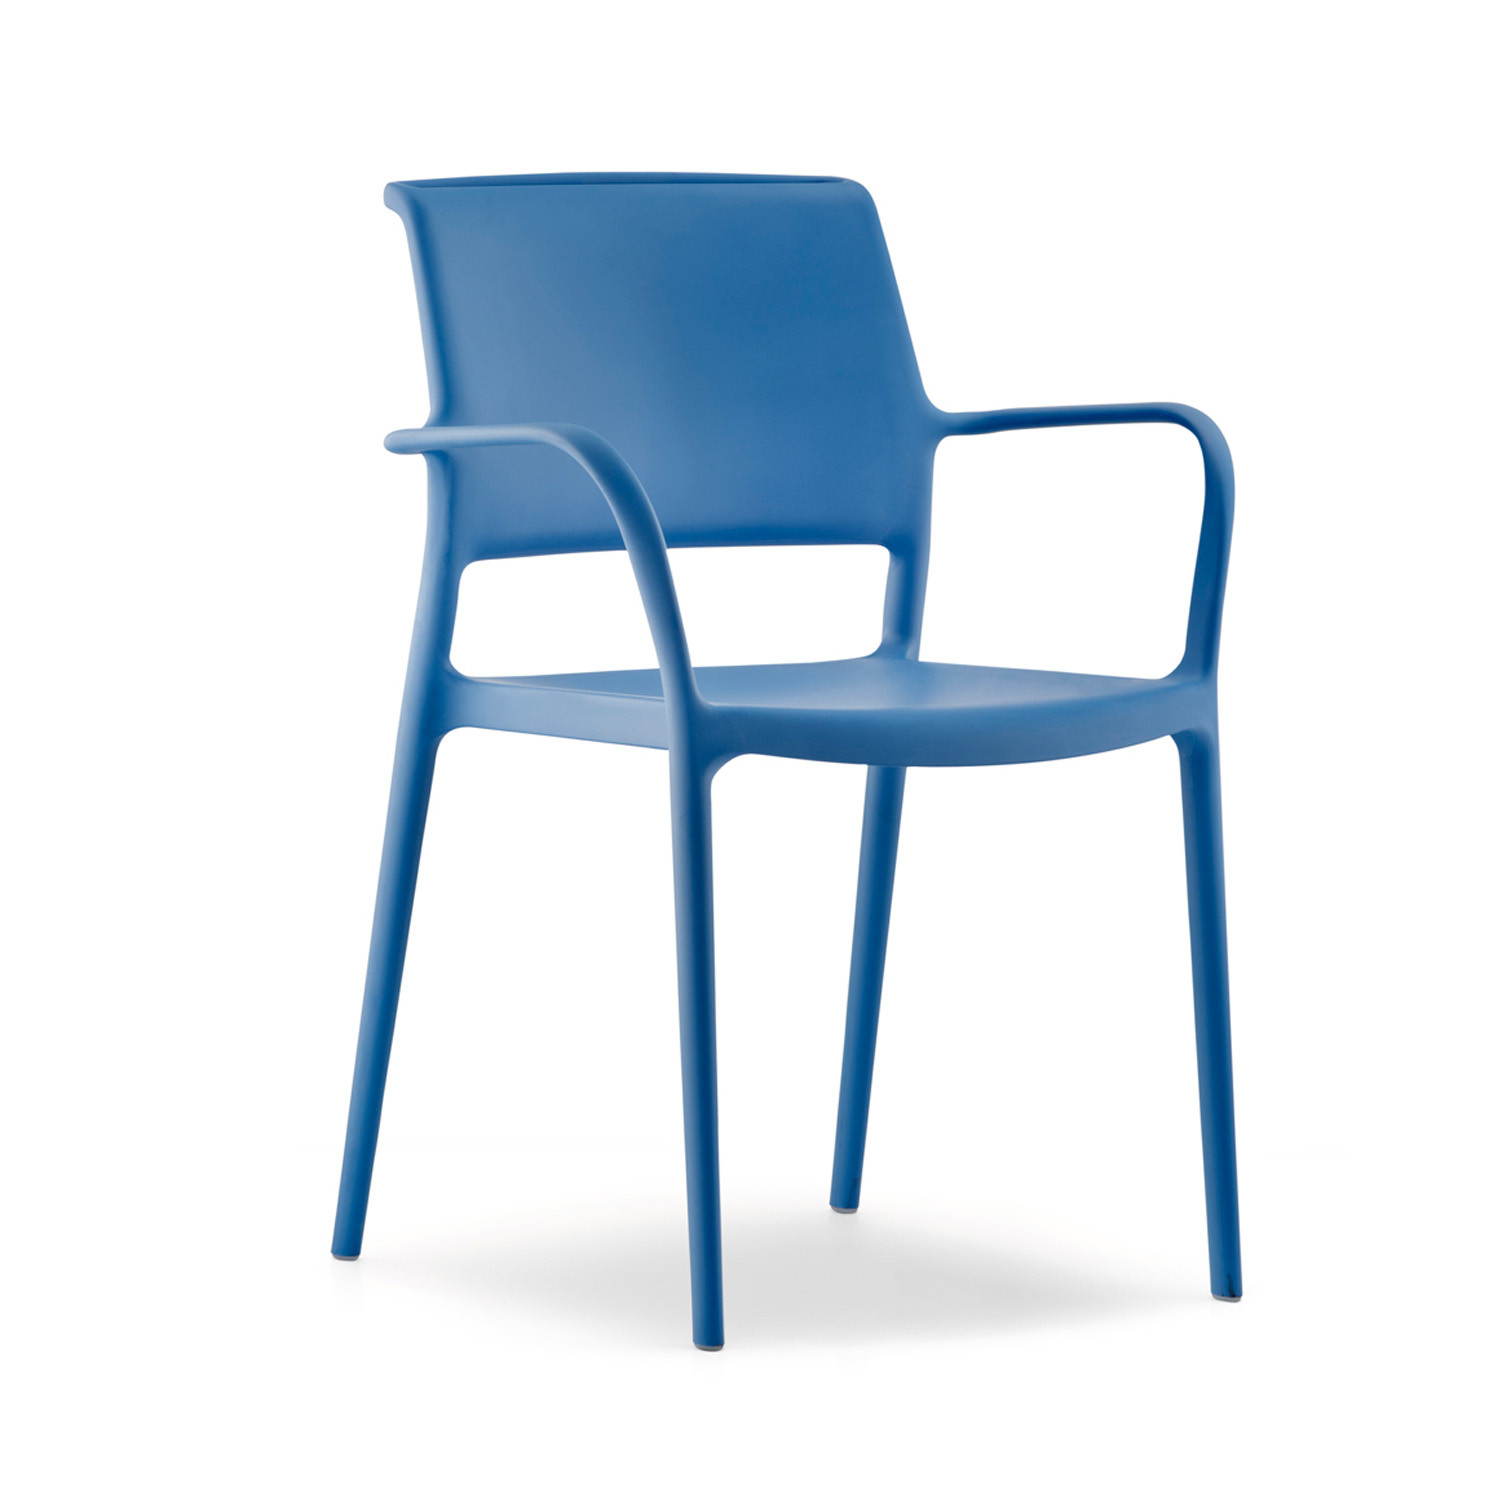 Ara Chairs by Pedrali